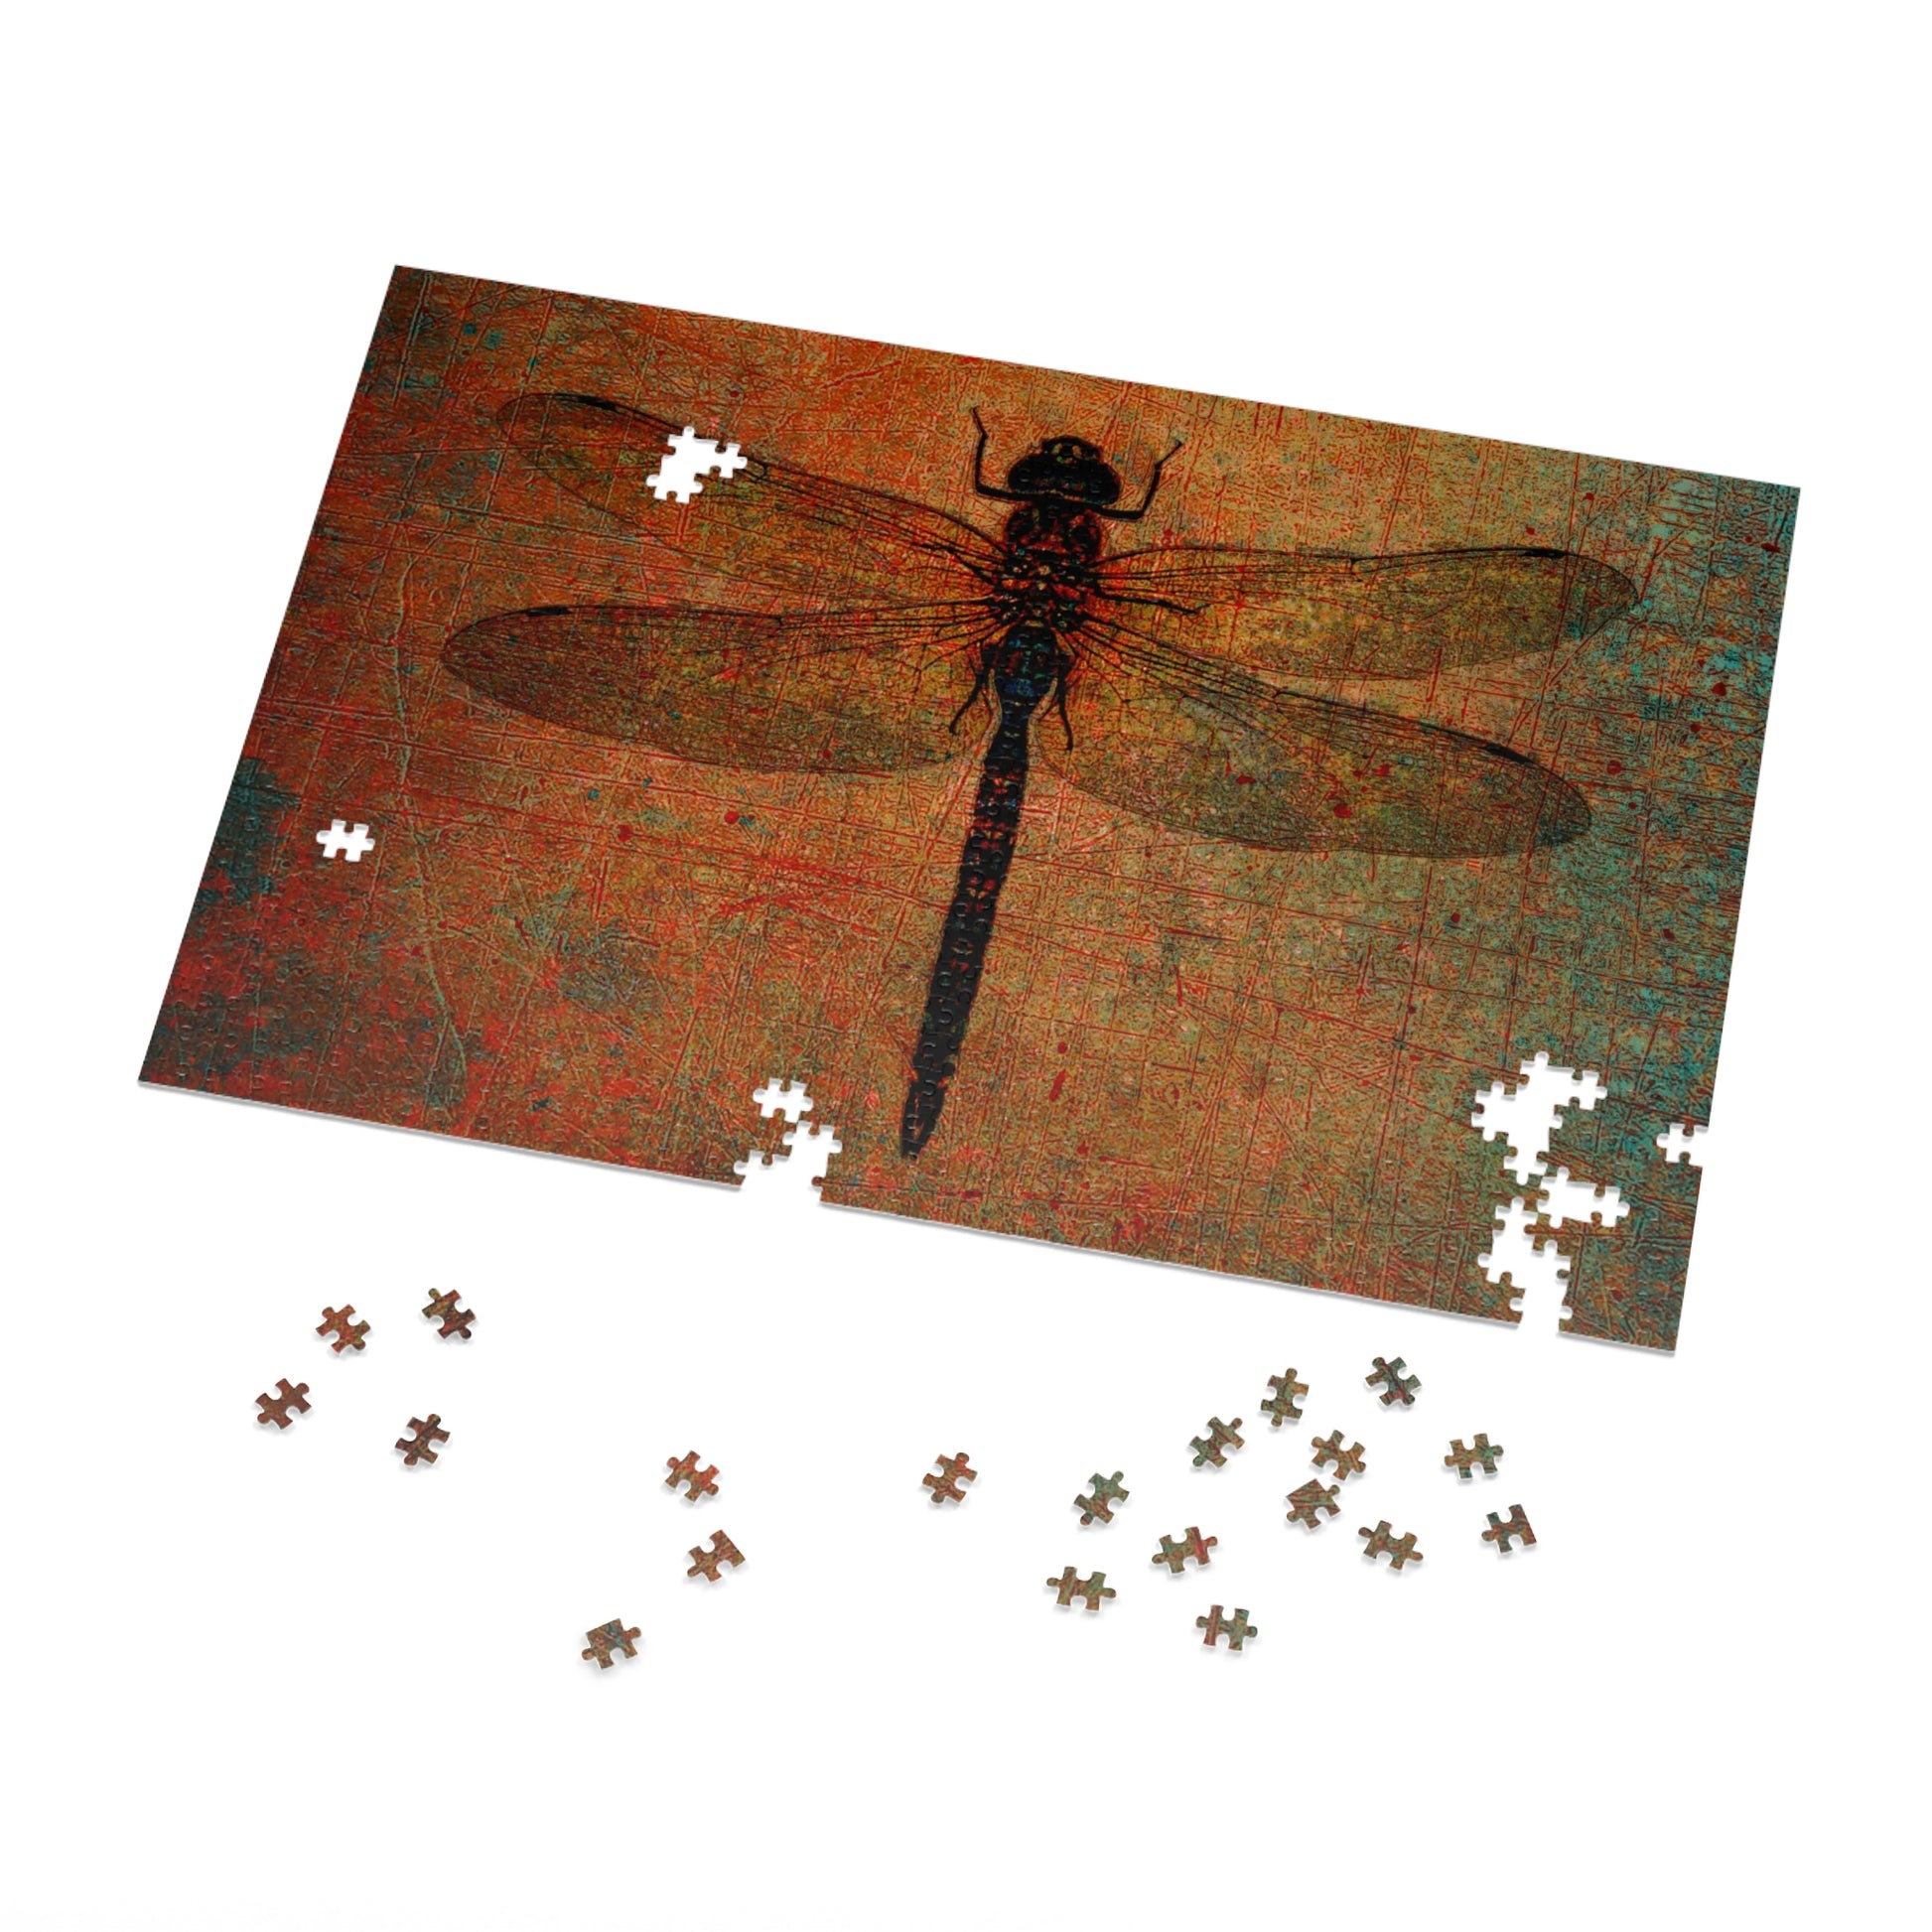 Dragonfly on Brown Stone Background Puzzle 1000 pieces in progress